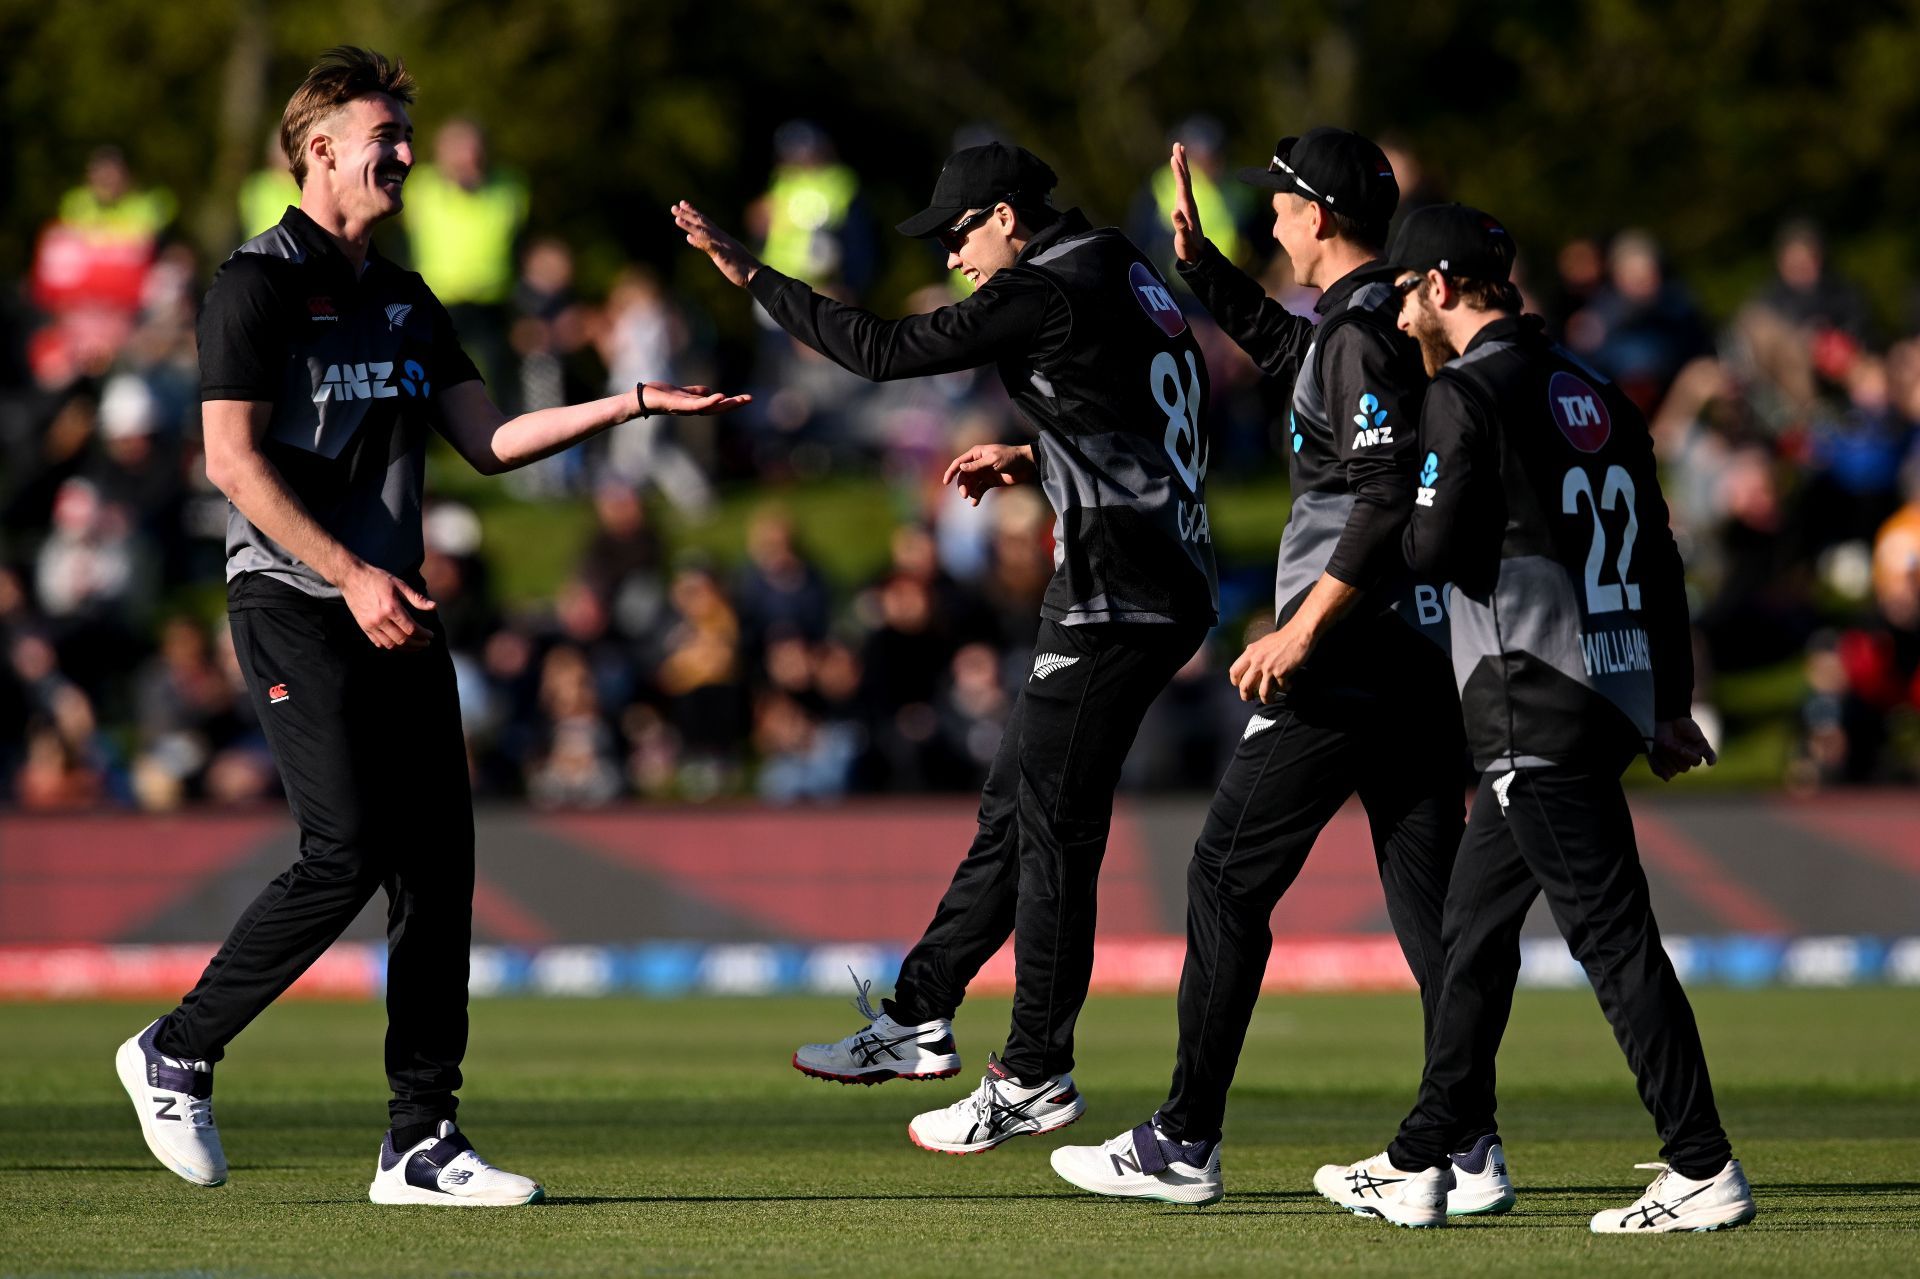 New Zealand tend to punch above their weight in ICC events.